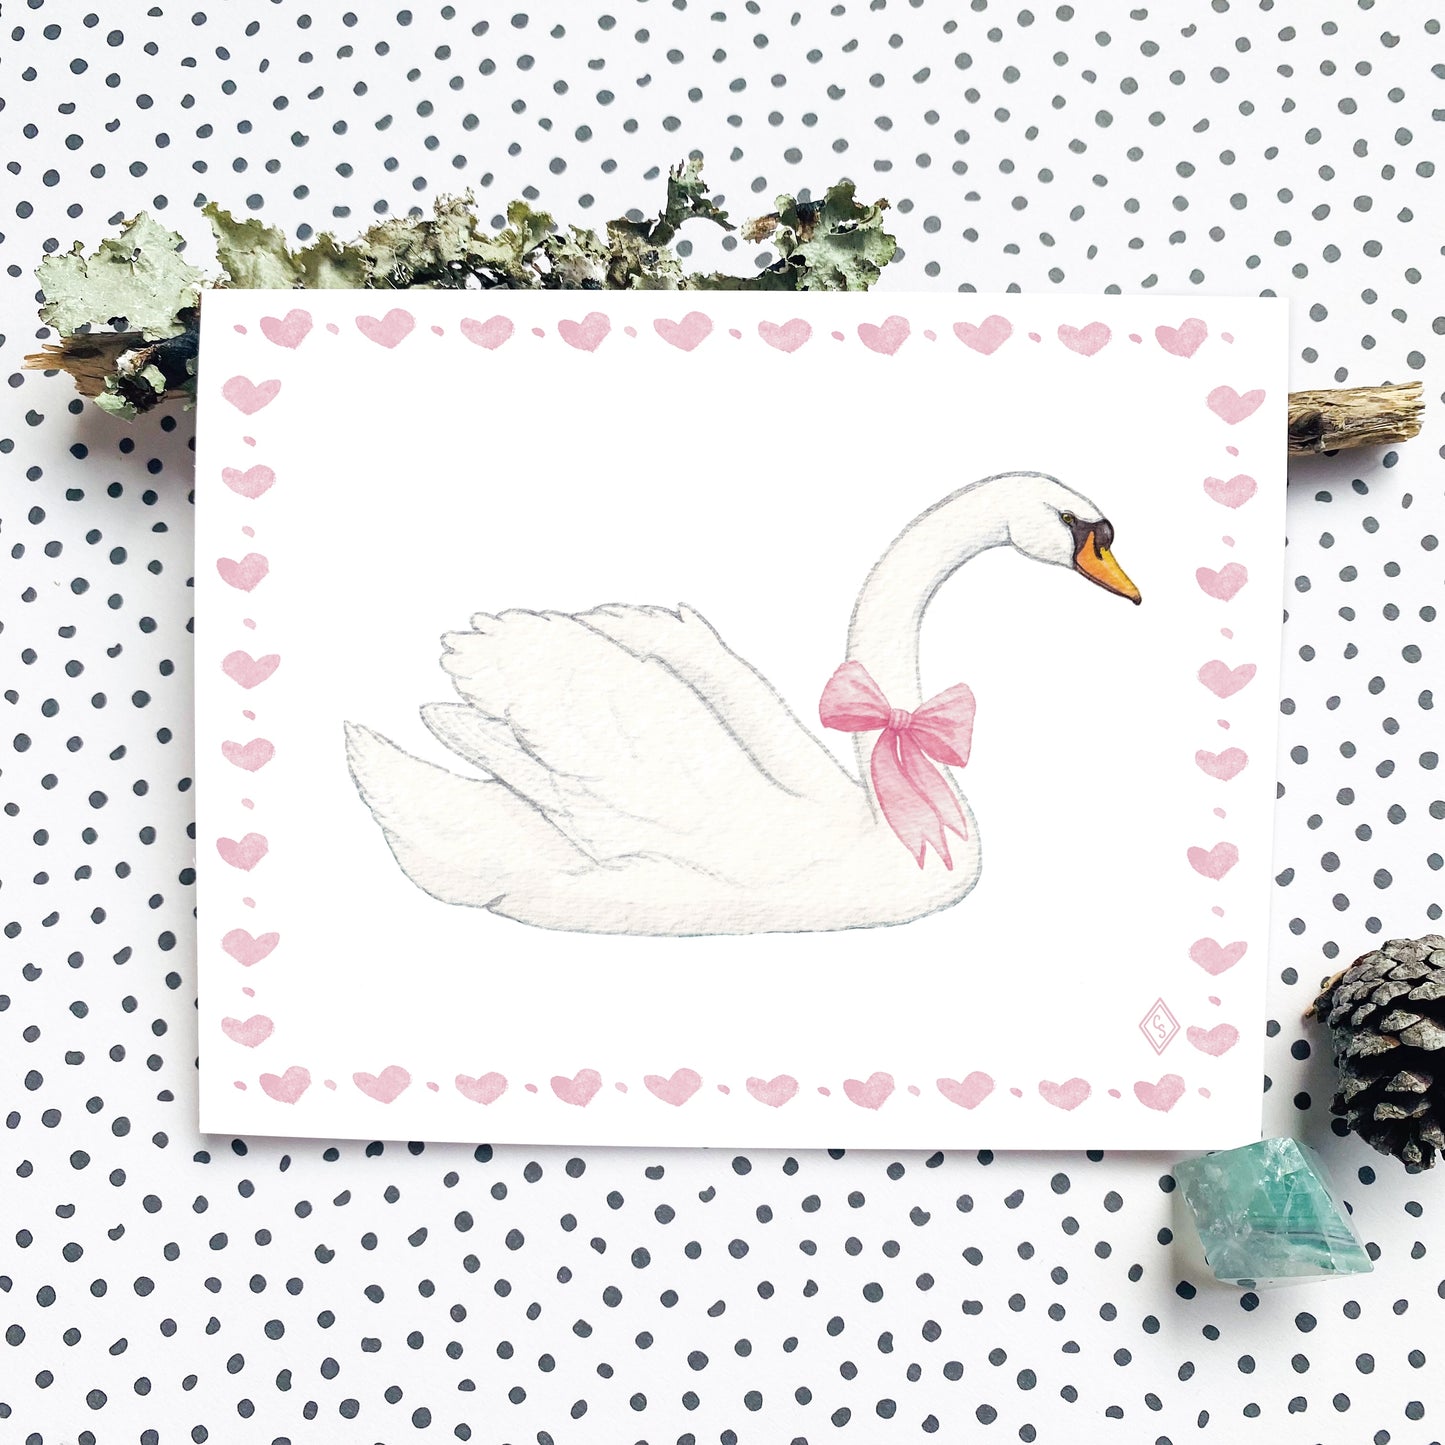 Coquette Swan Greeting Card